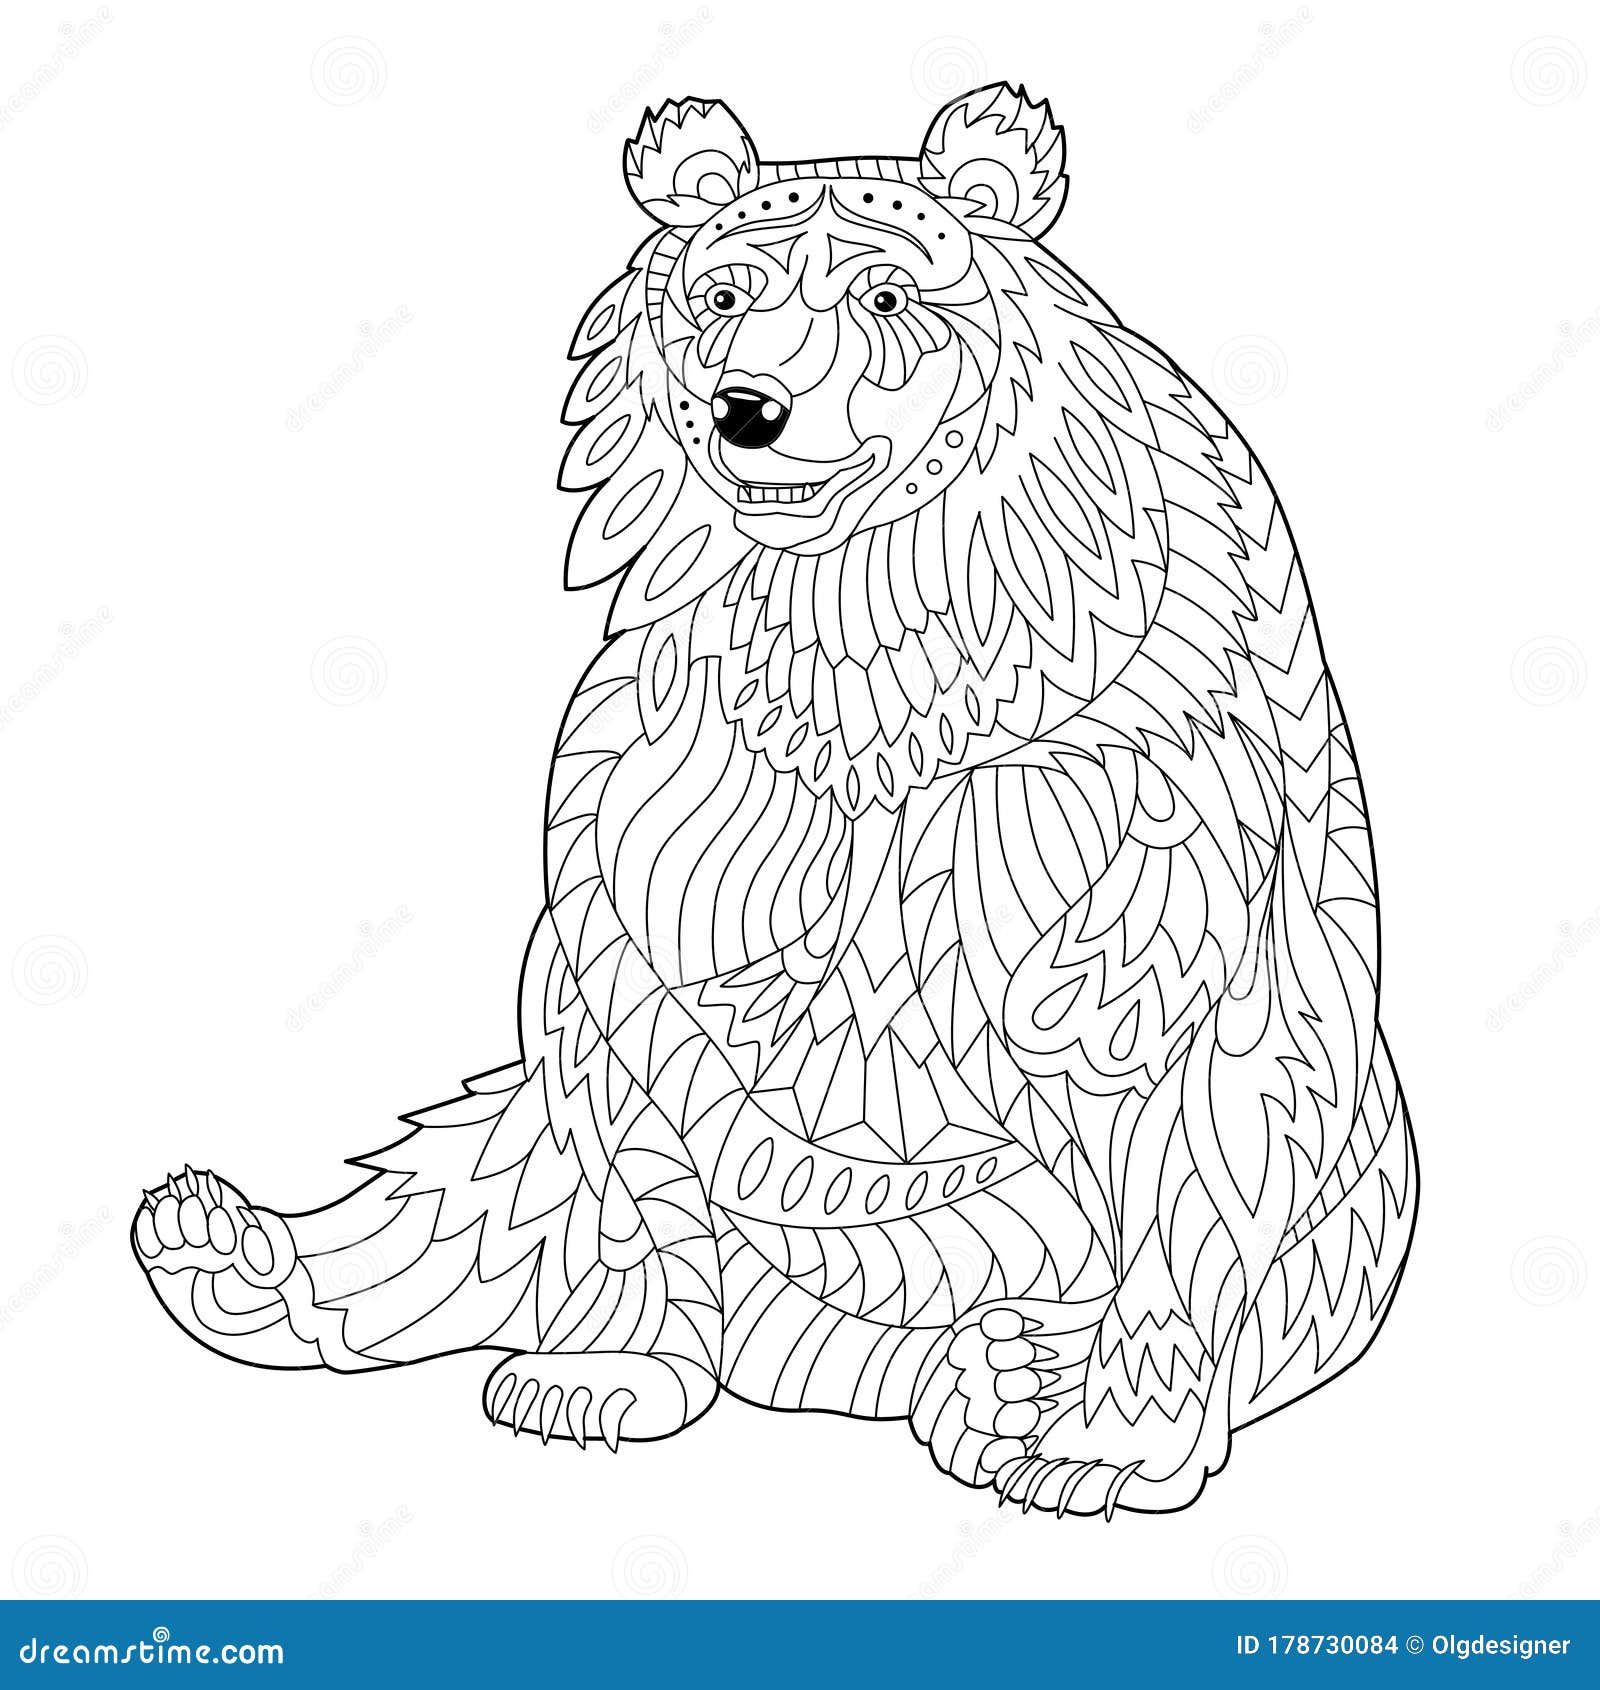 Bear Coloring Page for Adult and Children Stock Vector ...